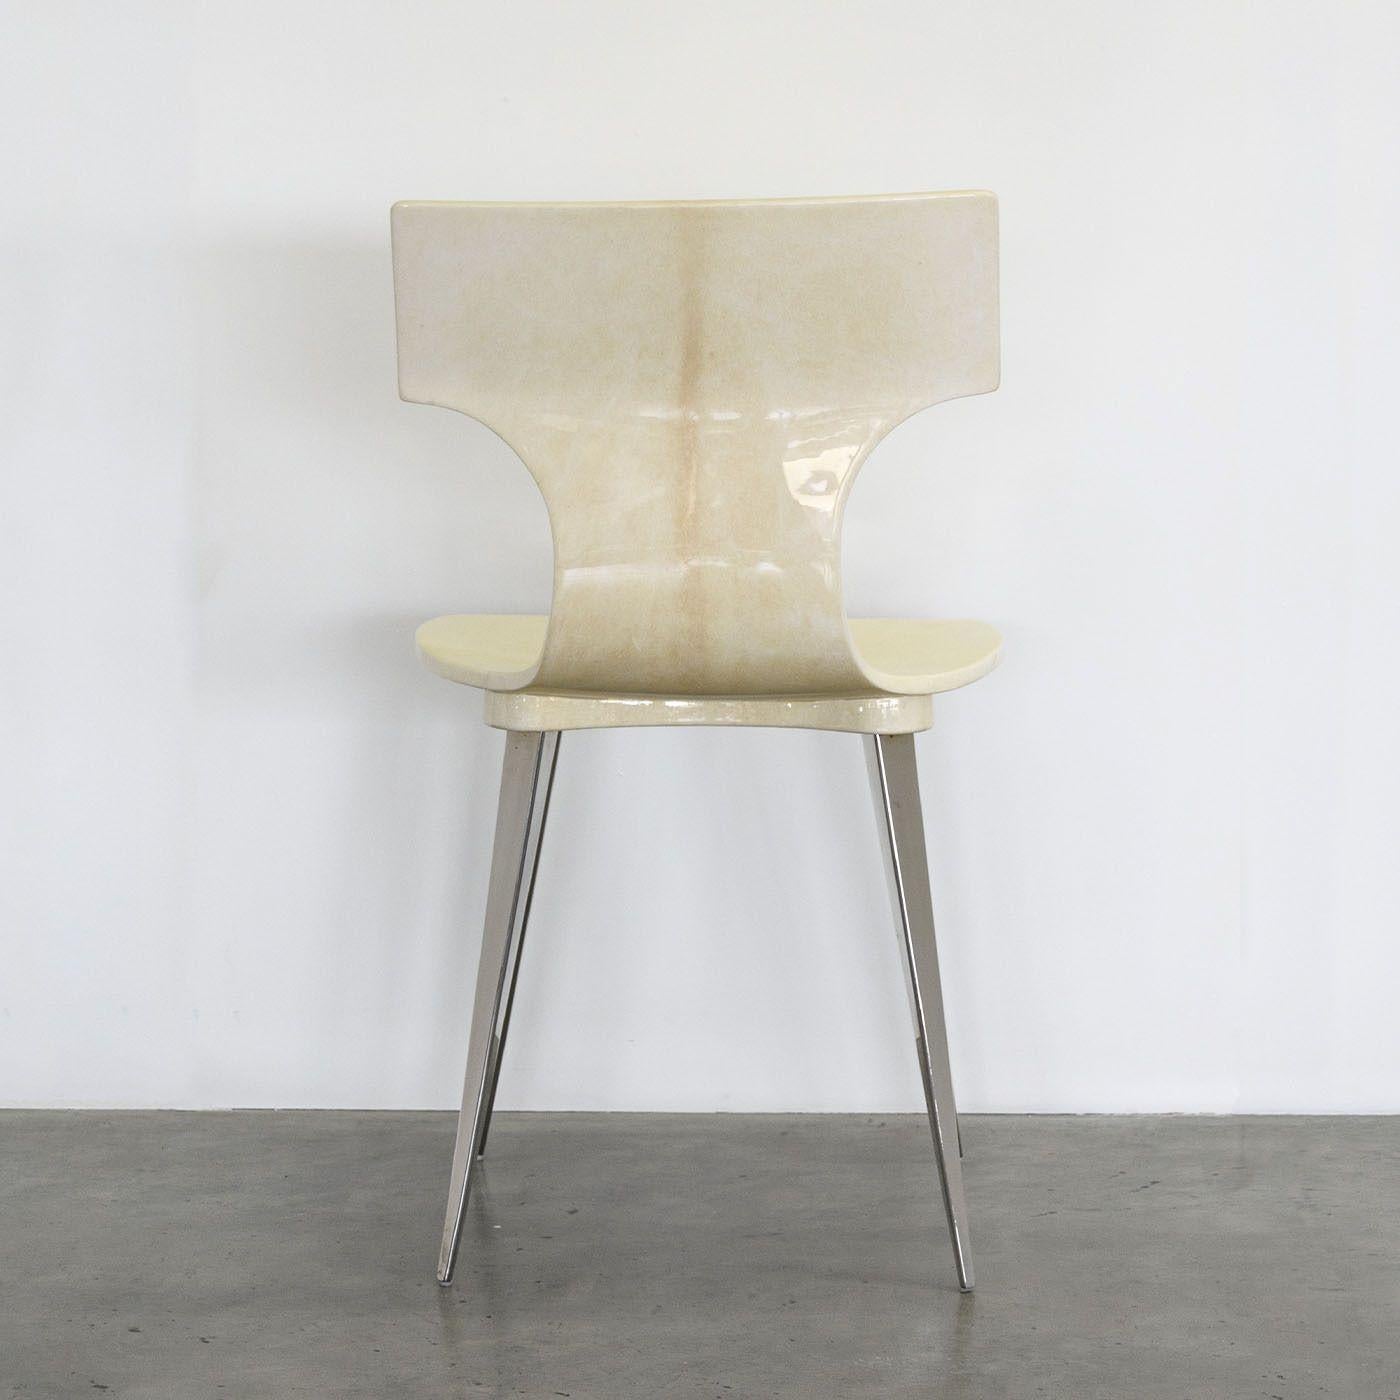 Dynamic and precious, this chair boasts a sturdy shaped shell with an ergonomic design promising long-lasting comfort. Its outstanding trait is the prized natural goatskin parchment fully enveloping its shell, finalized by a high gloss finish